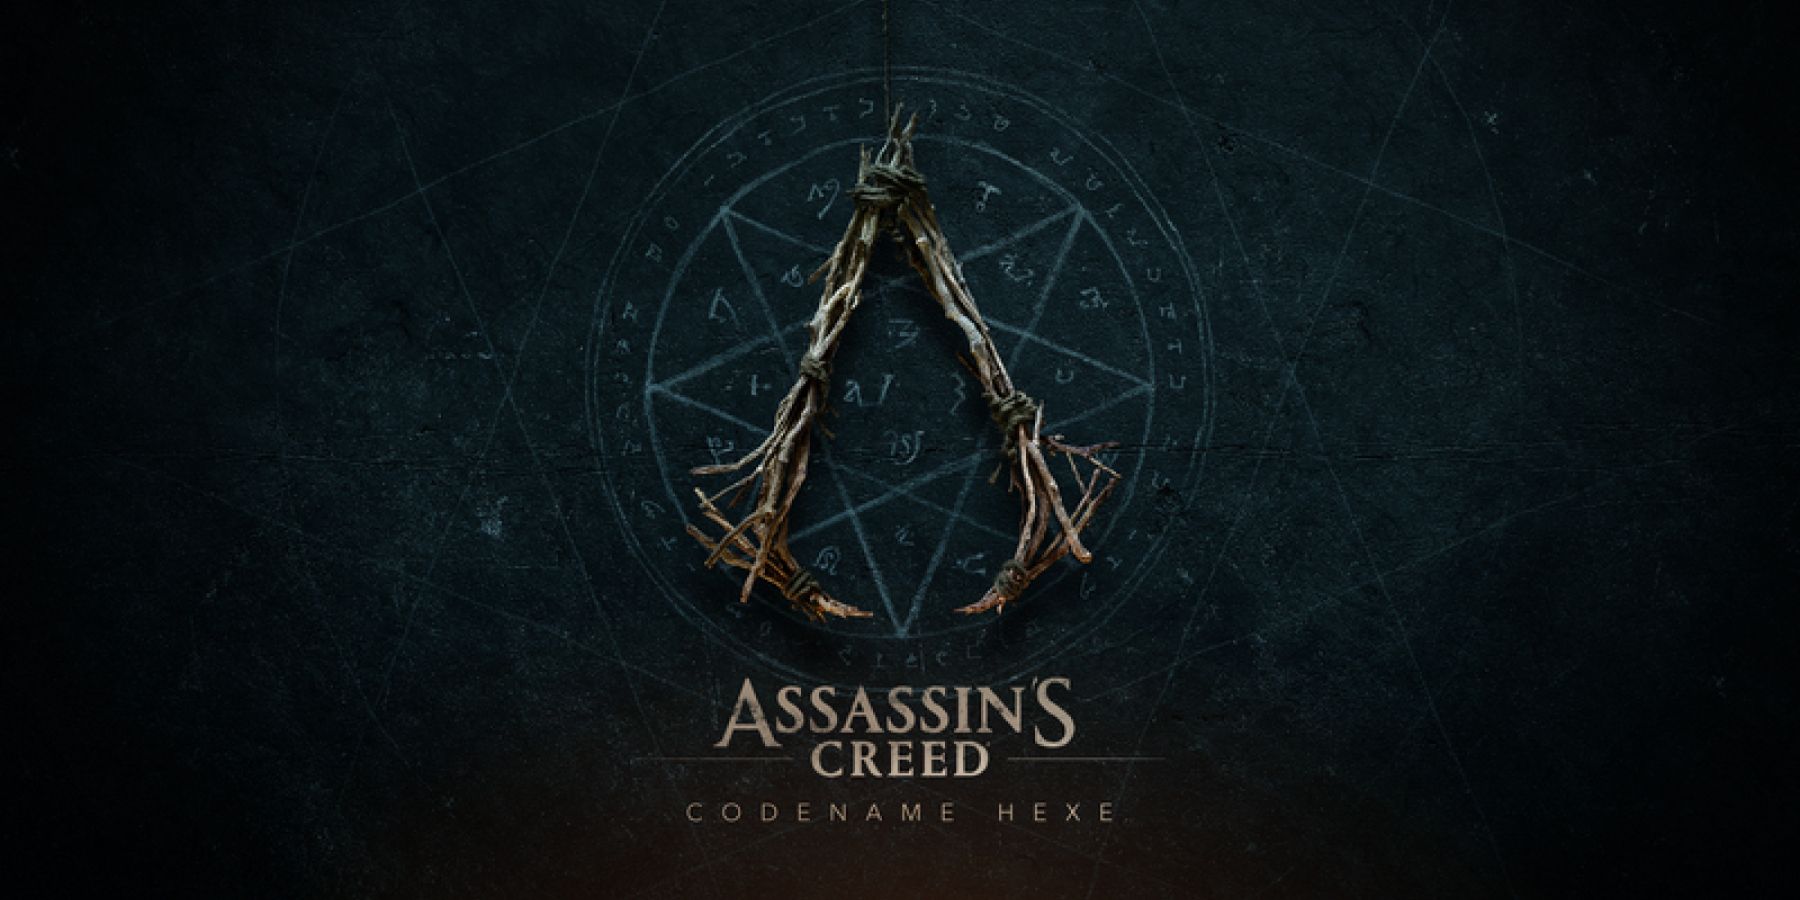 Assassin's Creed Hexe Codename